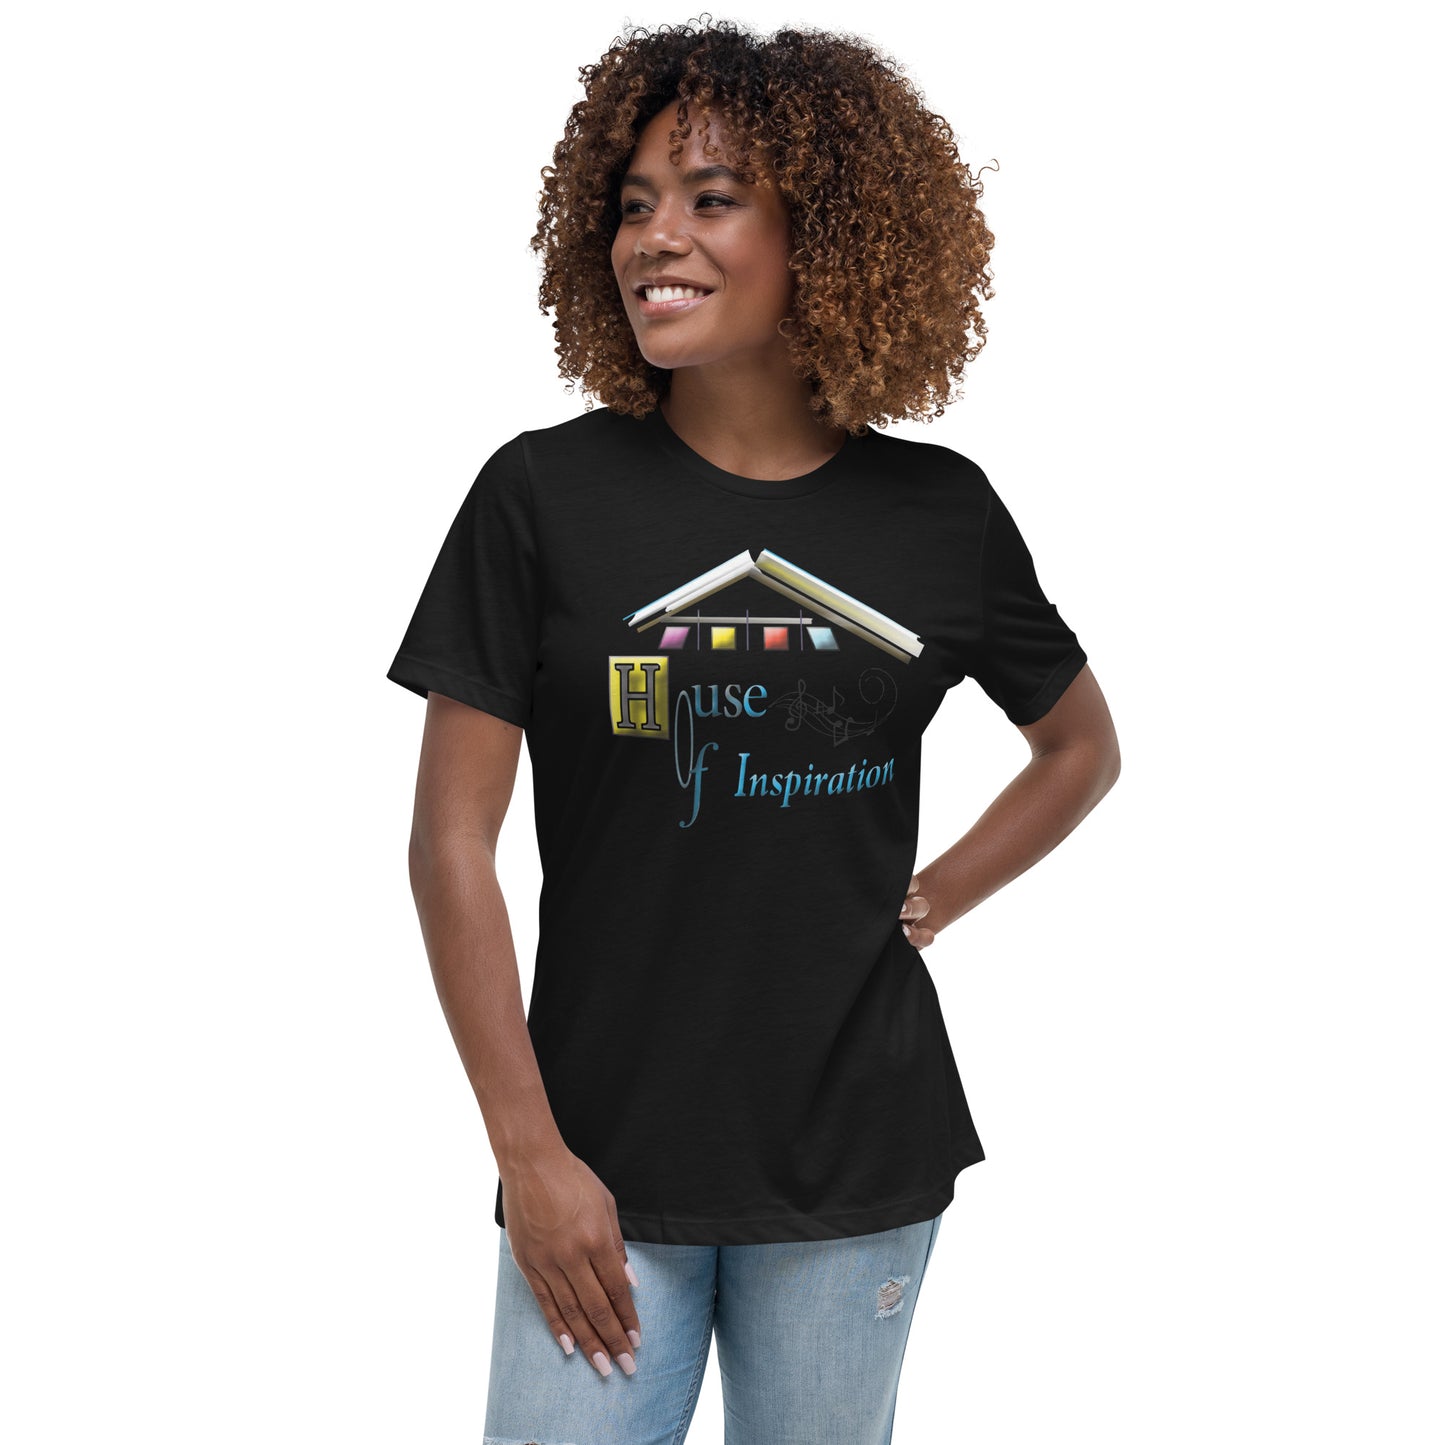 House of Inspiration Women's Relaxed T-Shirt